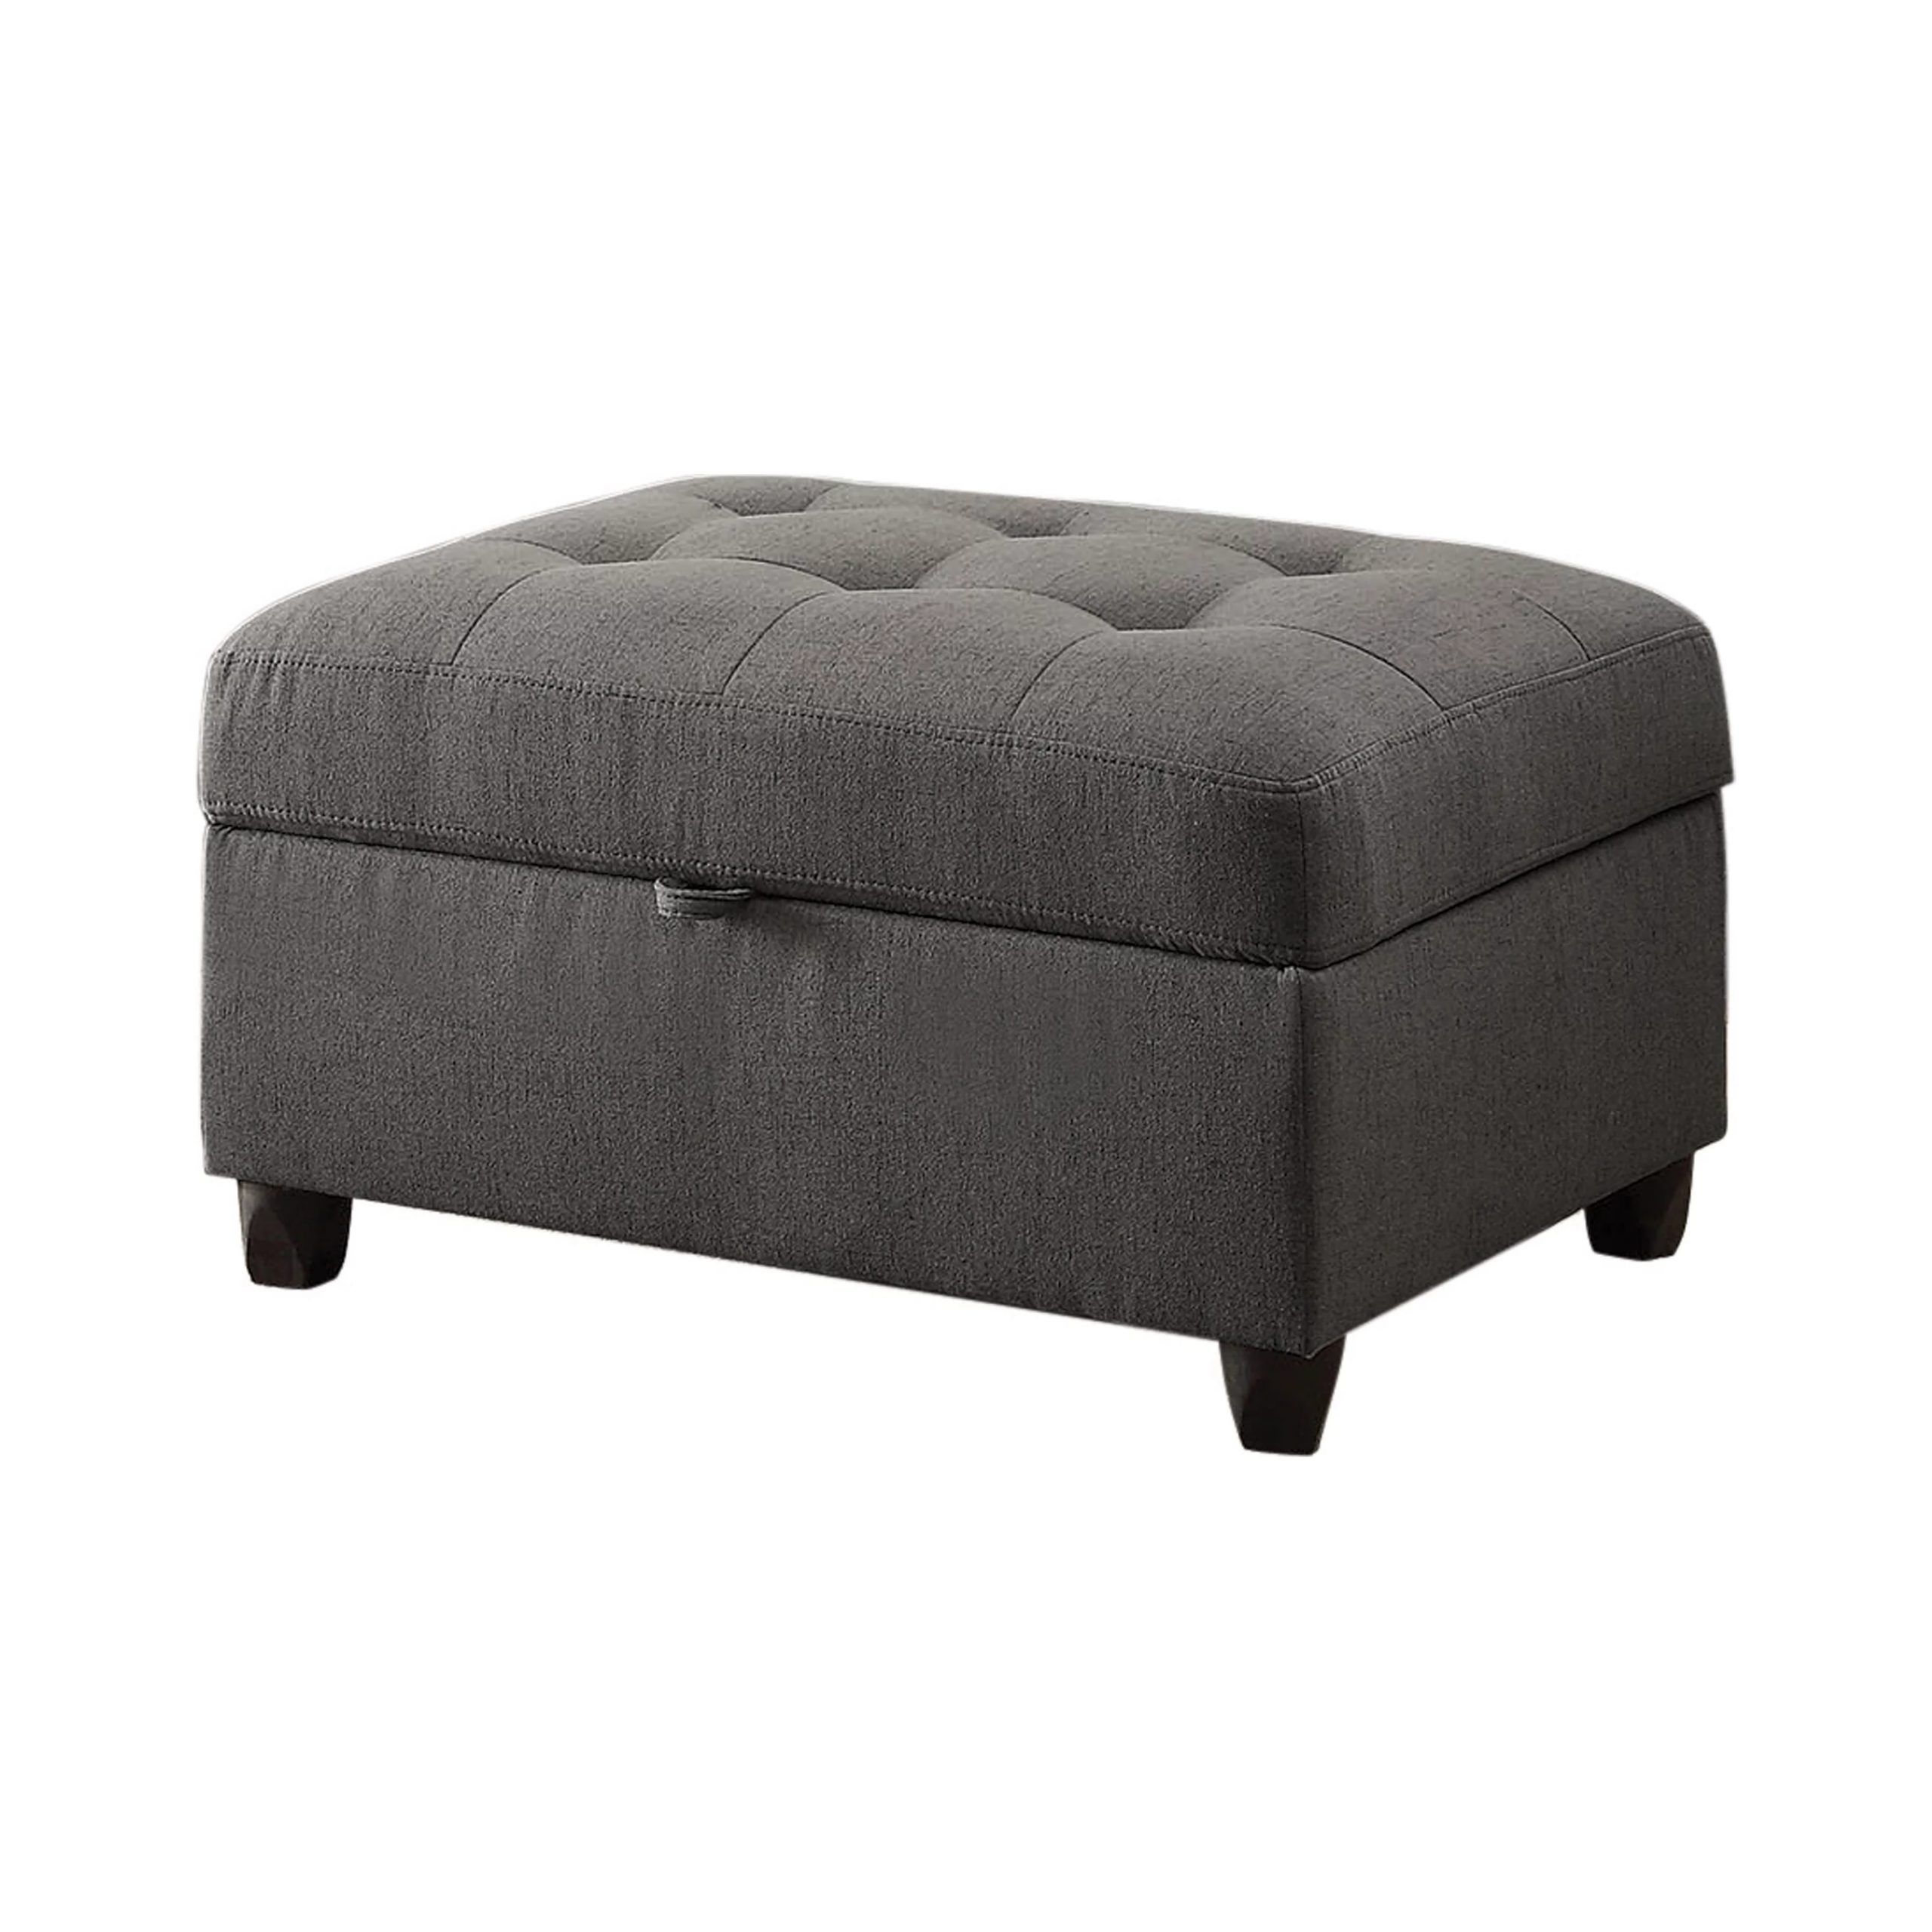 Stonenesse Tufted Storage Ottoman Grey – Walmart – Walmart Pertaining To Famous Brown And Gray Button Tufted Ottomans (View 6 of 10)